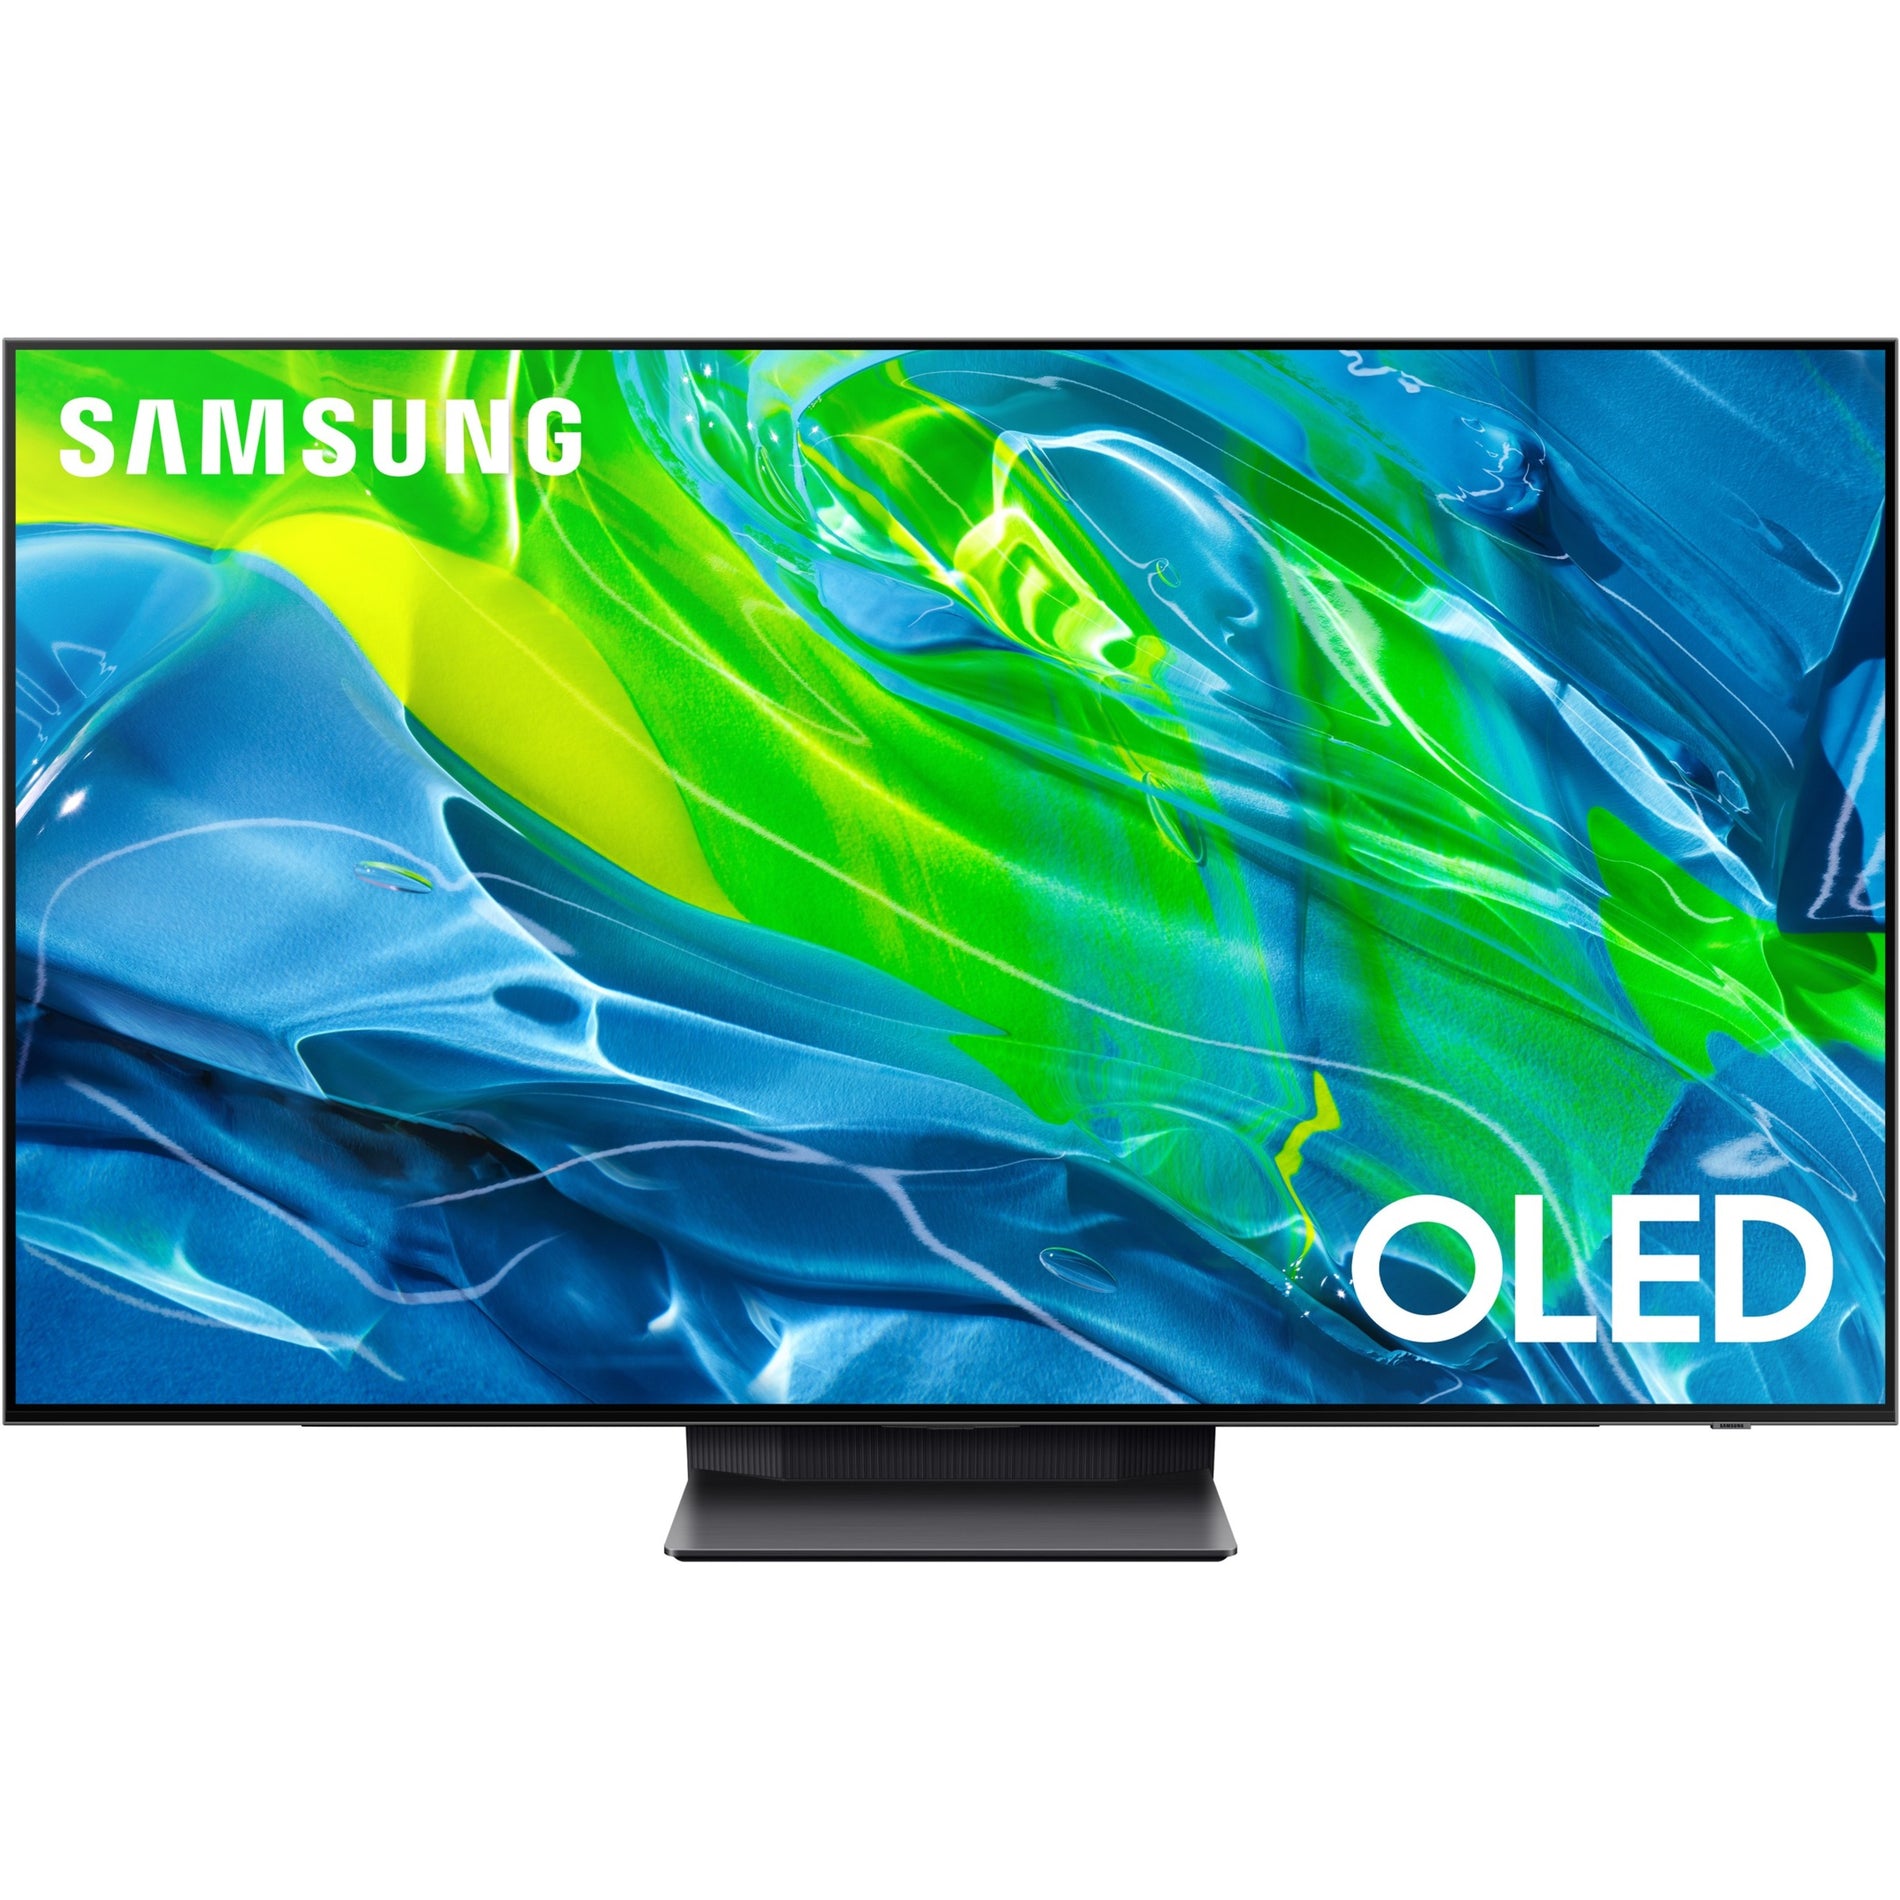 Samsung QN55S95BAFXZA 55" Class S95B OLED 4K Smart TV (2022), 120Hz, 4 HDMI Ports, Color Volume 100%, Neo Quantum Processor 4K with AI Upscaling, Object Tracking Sound, Ambient Mode +, SolarCell Remote